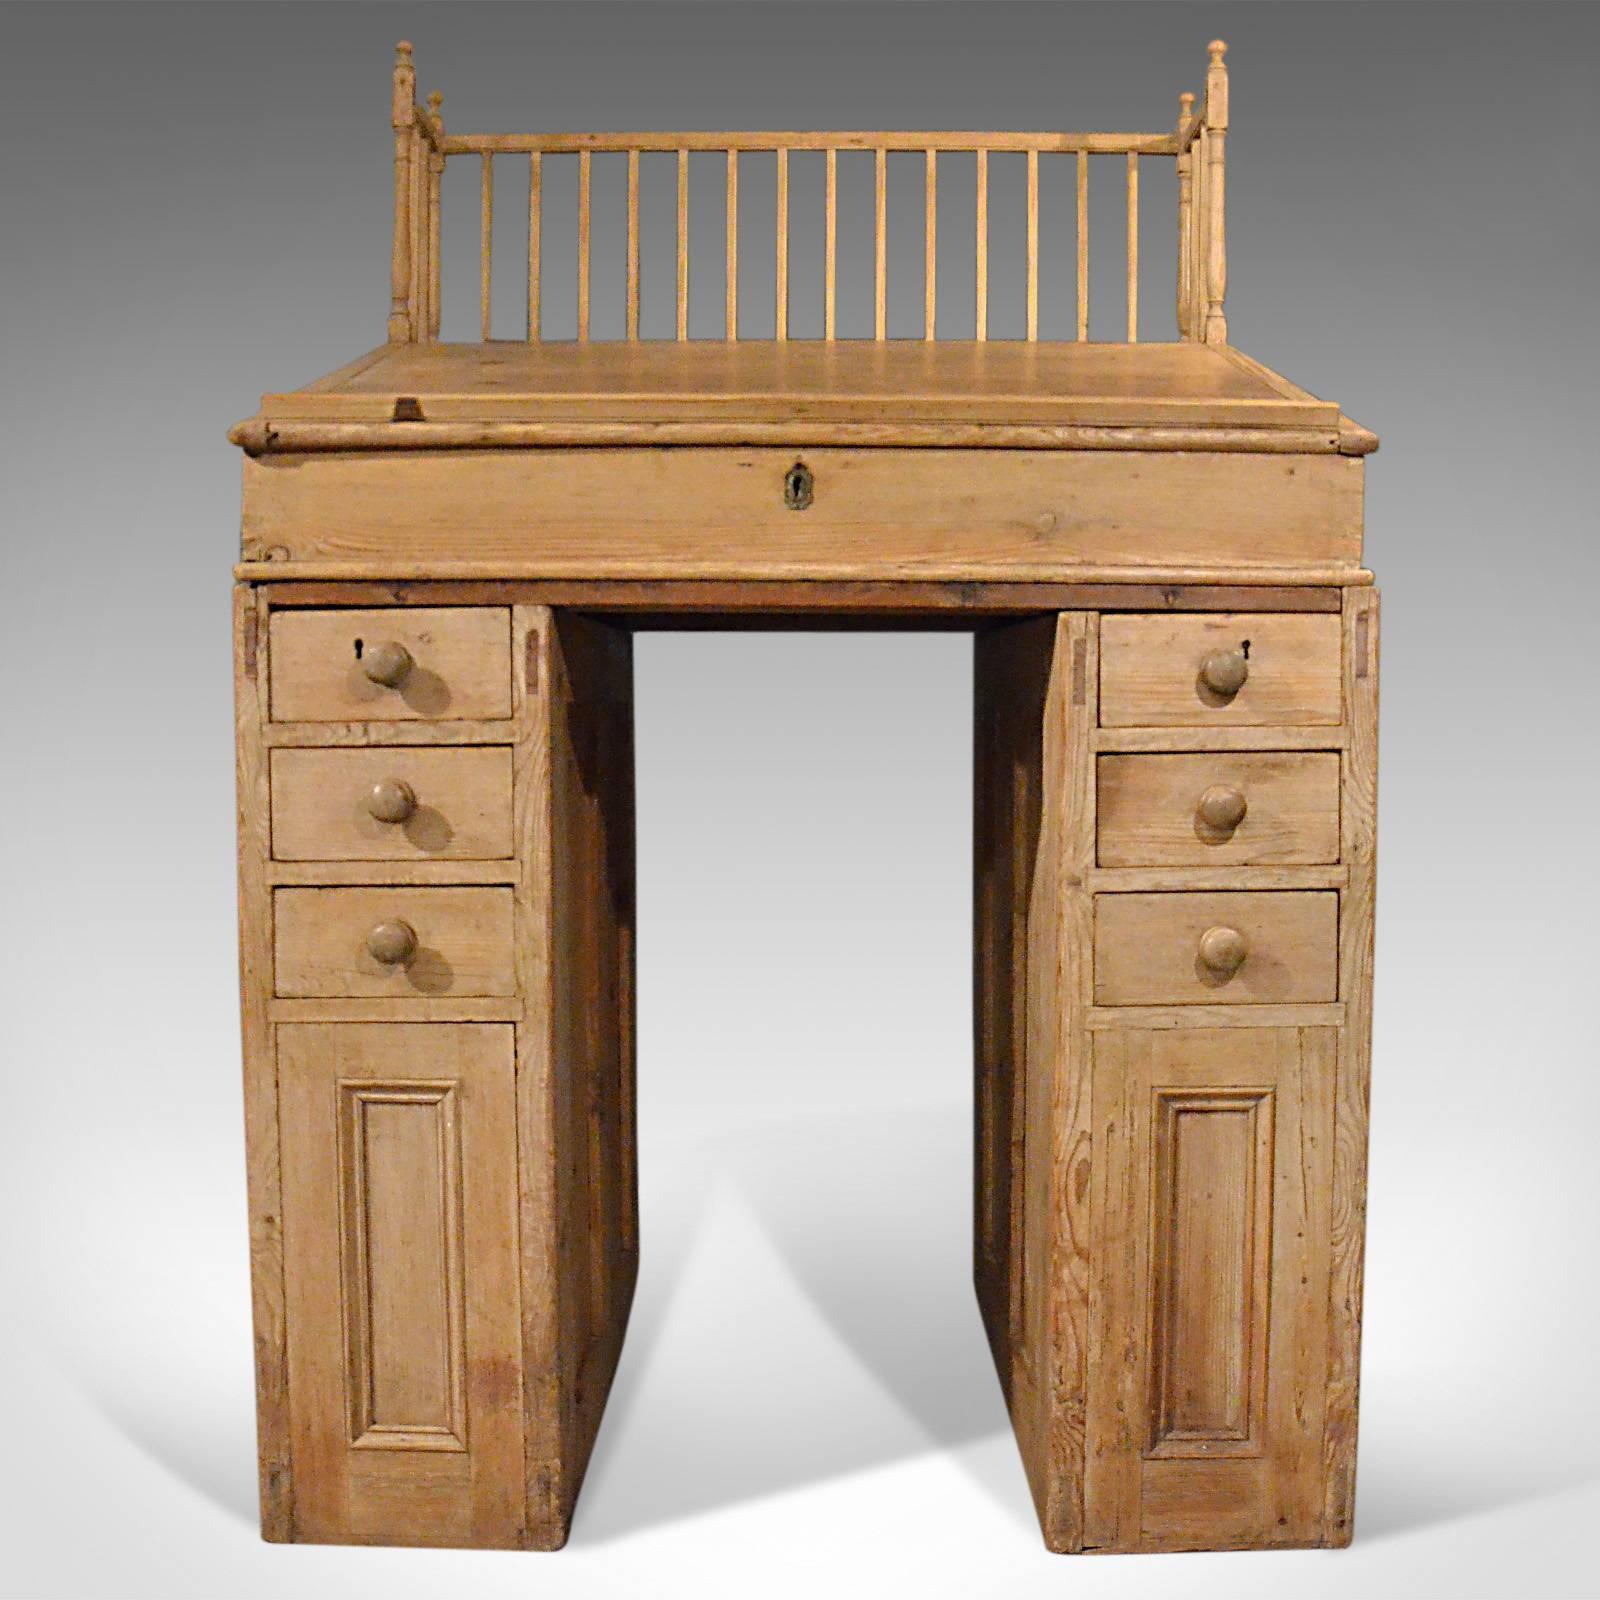 This is an antique clerks desk, an English, Victorian, pine bureau from the late 19th century circa 1900.

Classic English styling in aged pine with a very desirable tone
Attractive proportions – can be used with a stool or as a standing